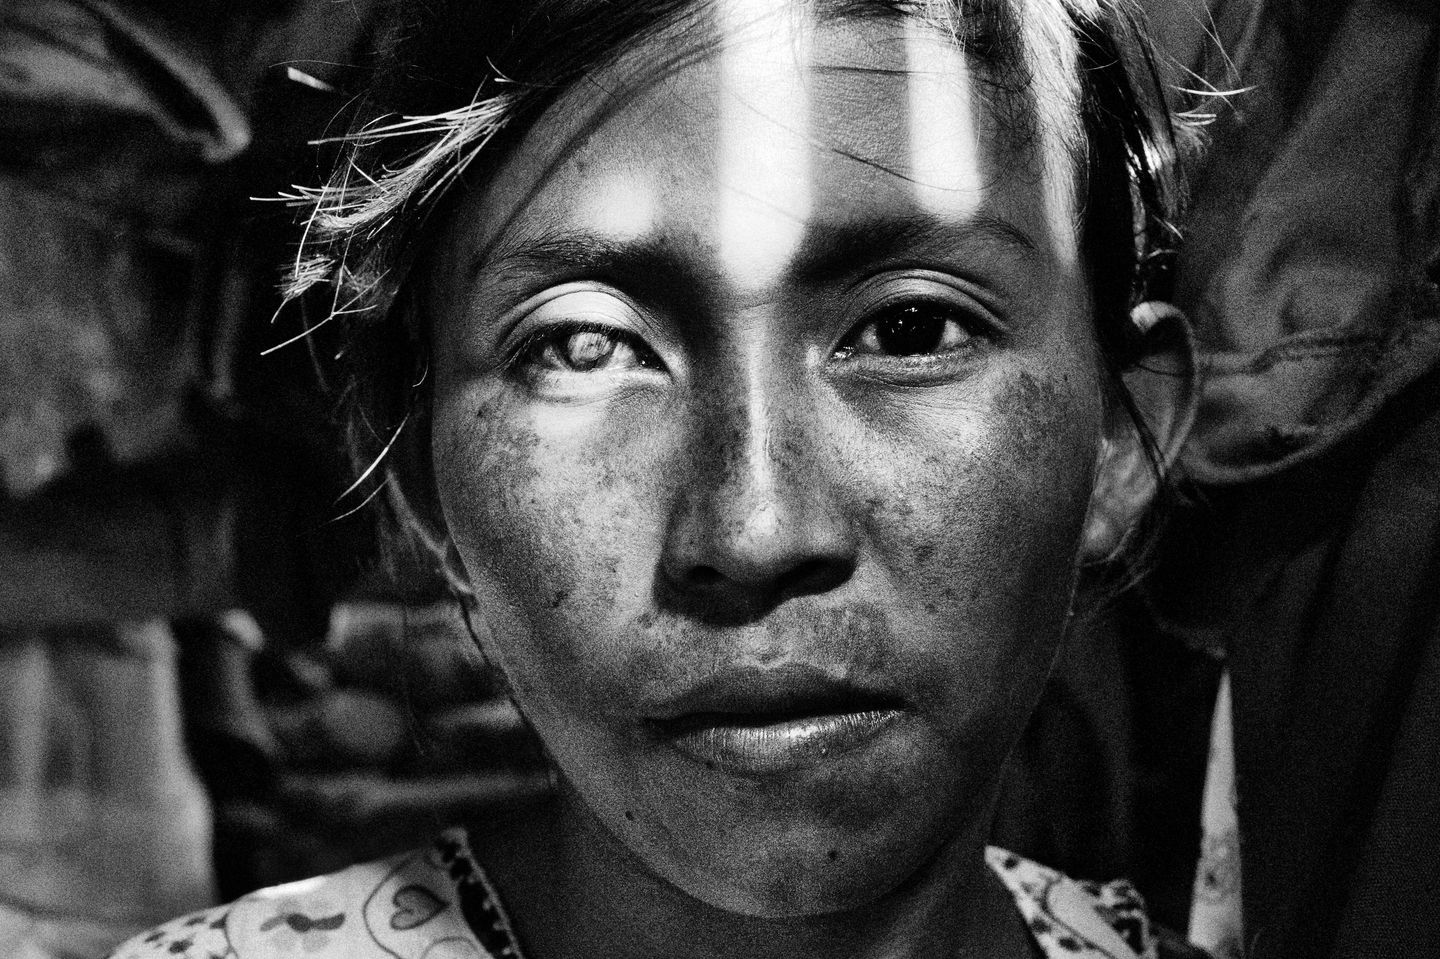 A photographer documents the lives of the Wayuu people of Colombia, who live in extreme poverty – The Washington Post